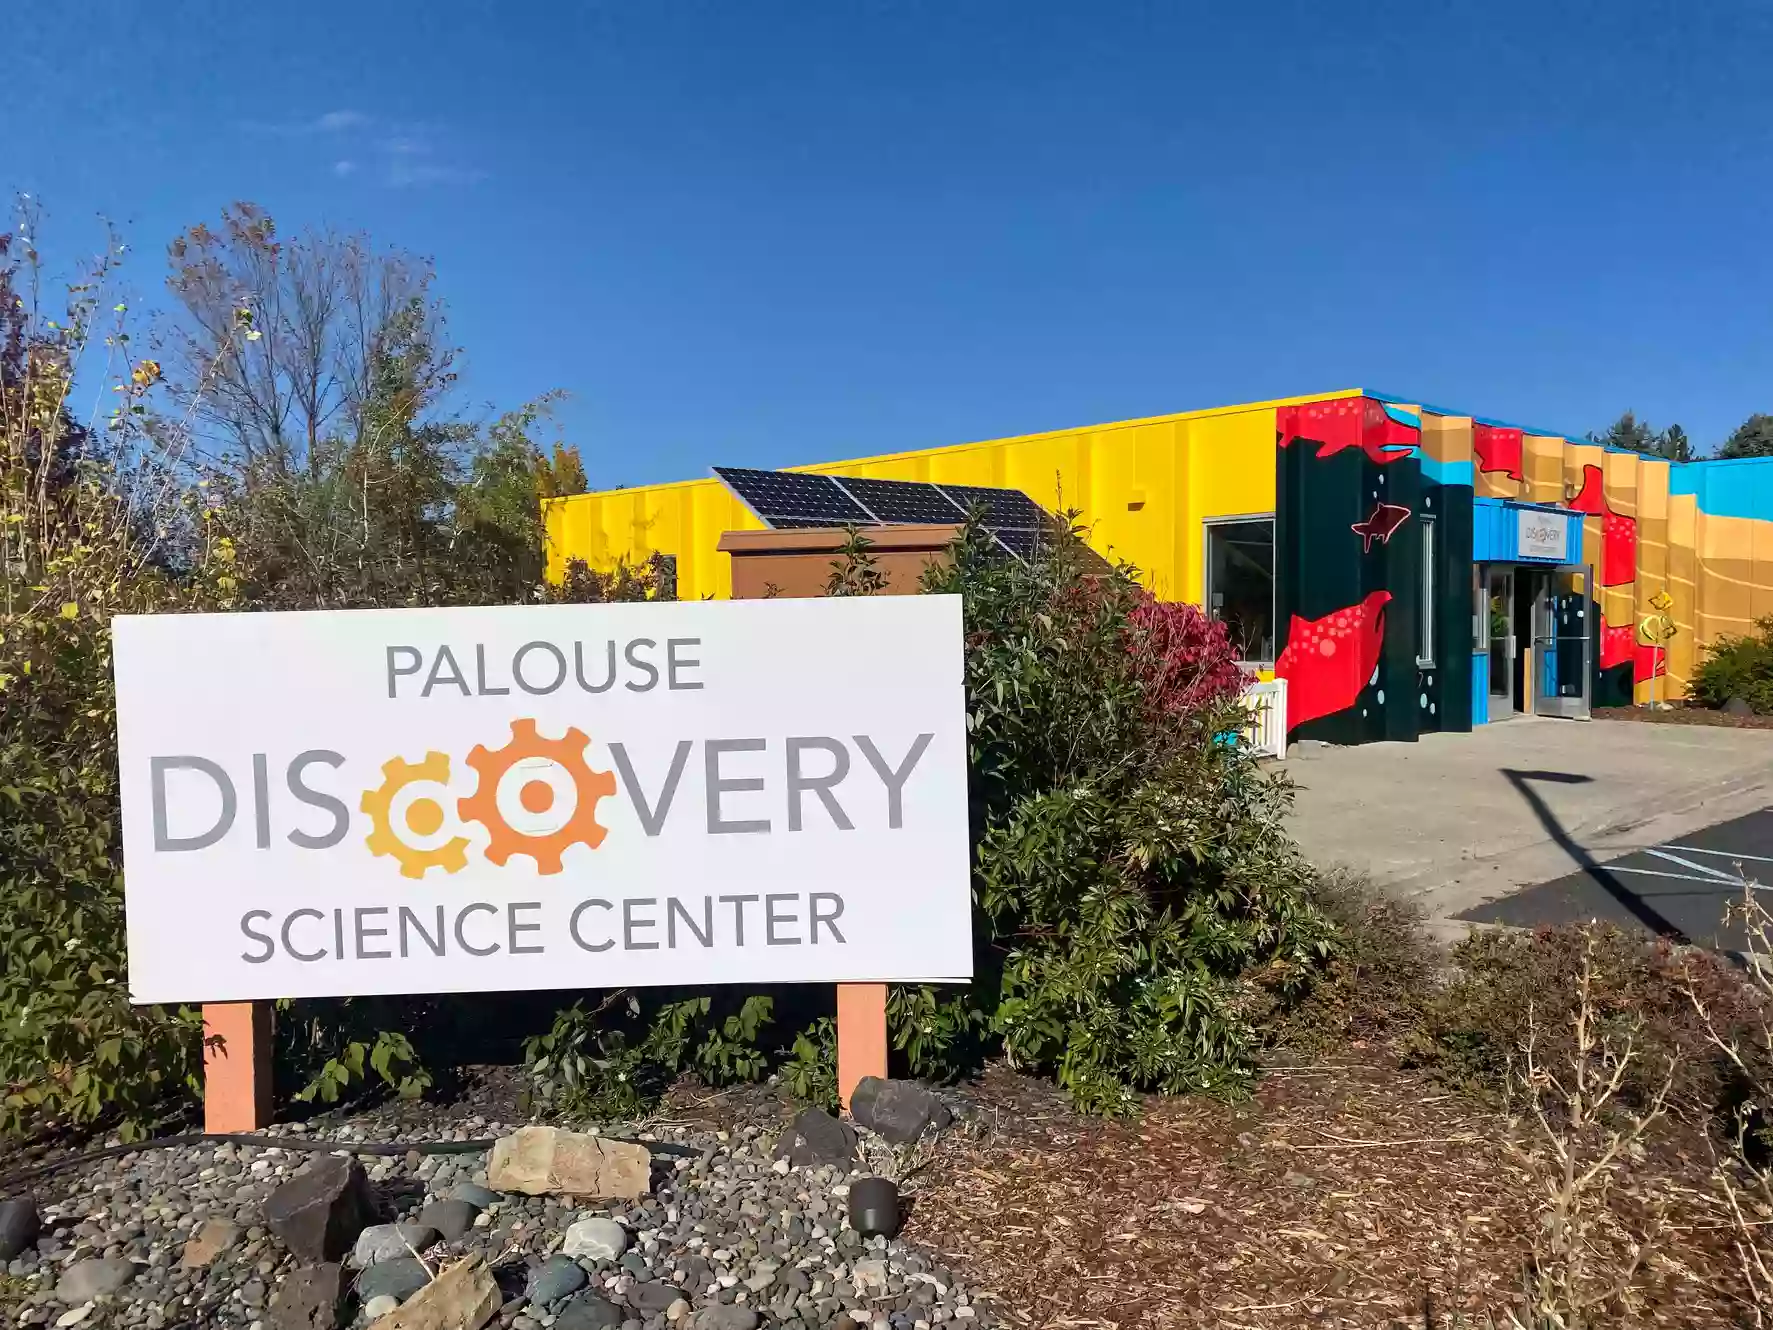 Palouse Discovery Science Center